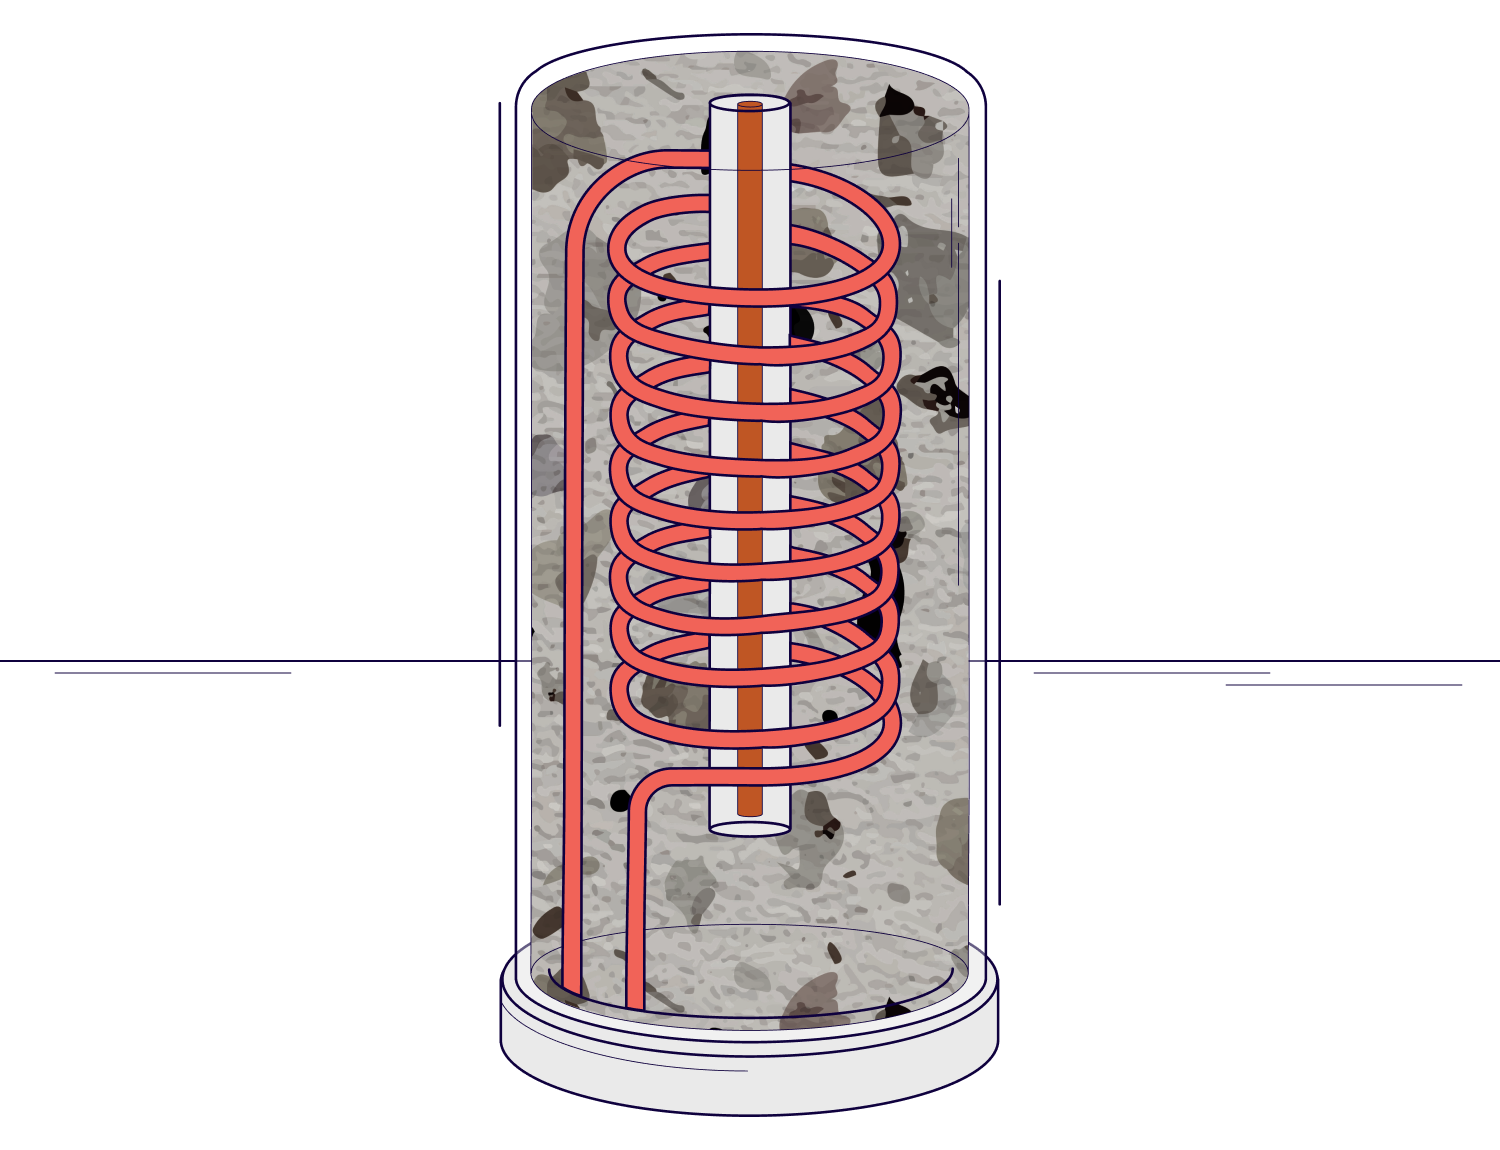 Heat cell with heat extraction